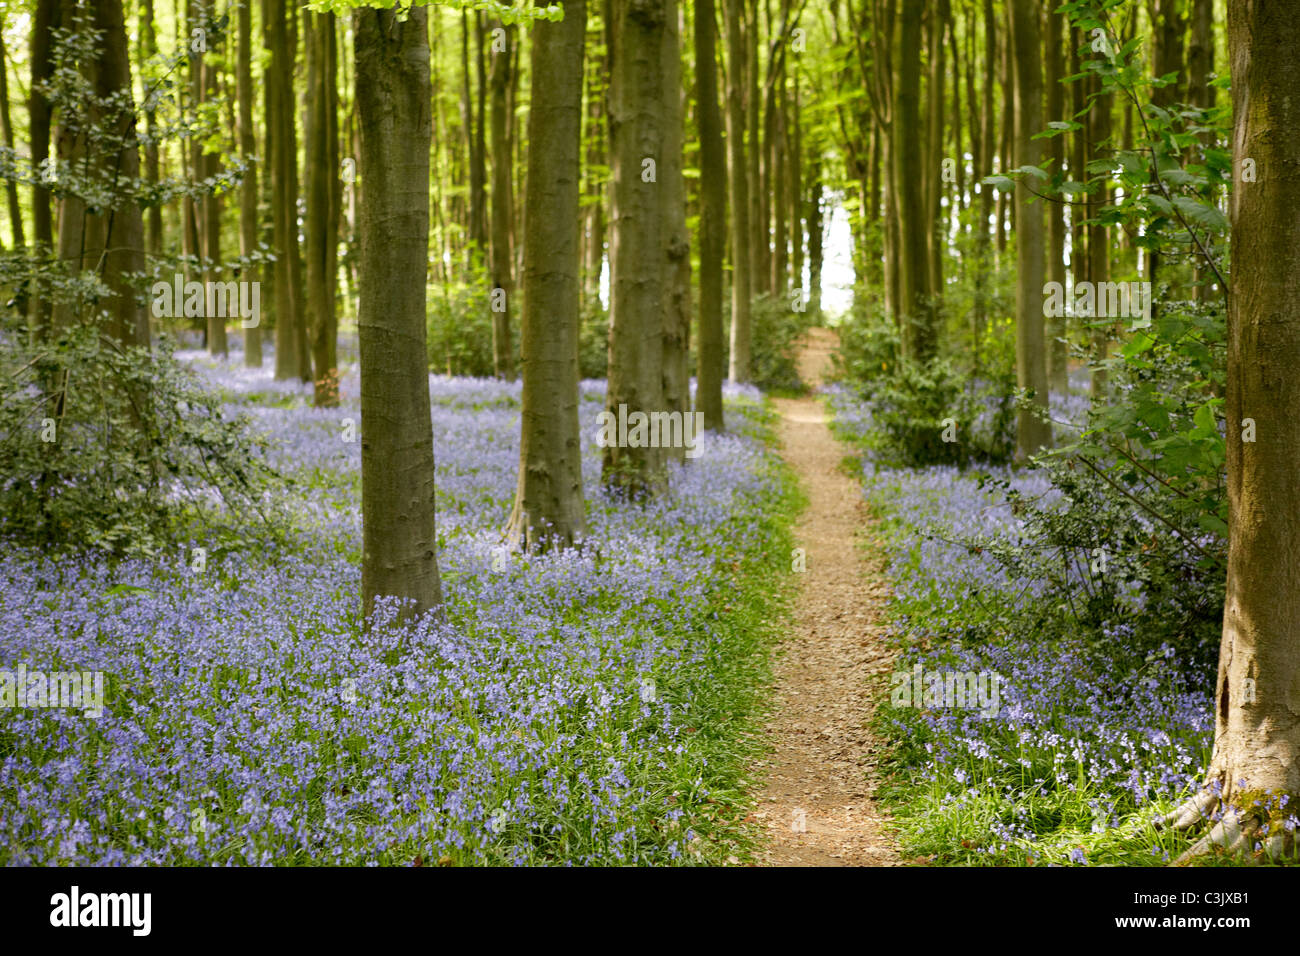 Springtime Bluebells in the woods showing the changing season in a dreamlike evening light. Stock Photo